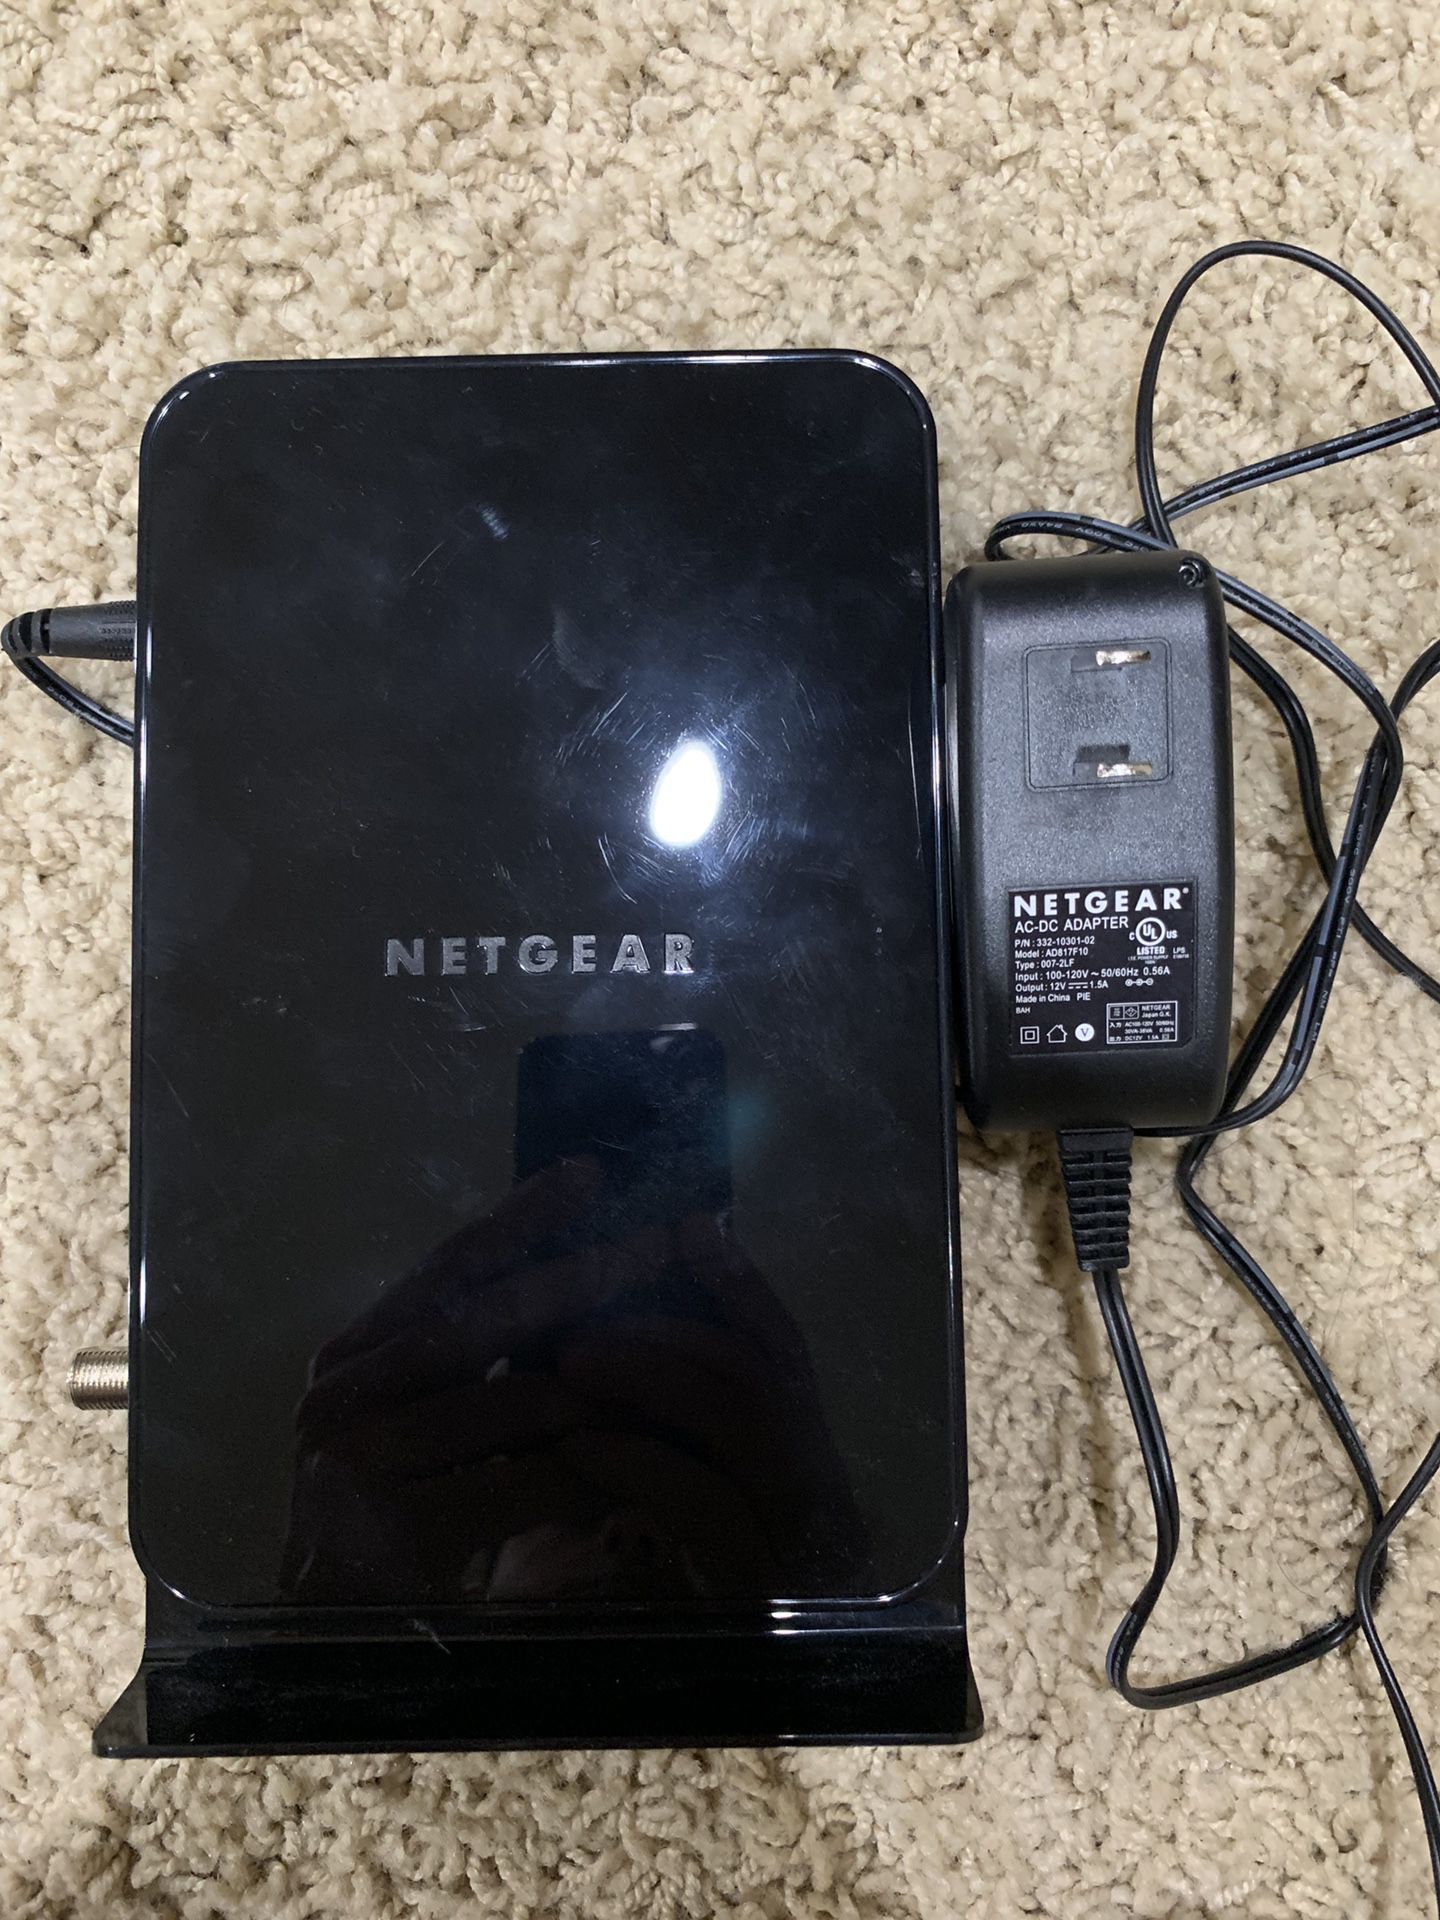 Netgear cable modem for Comcast and other internet providers